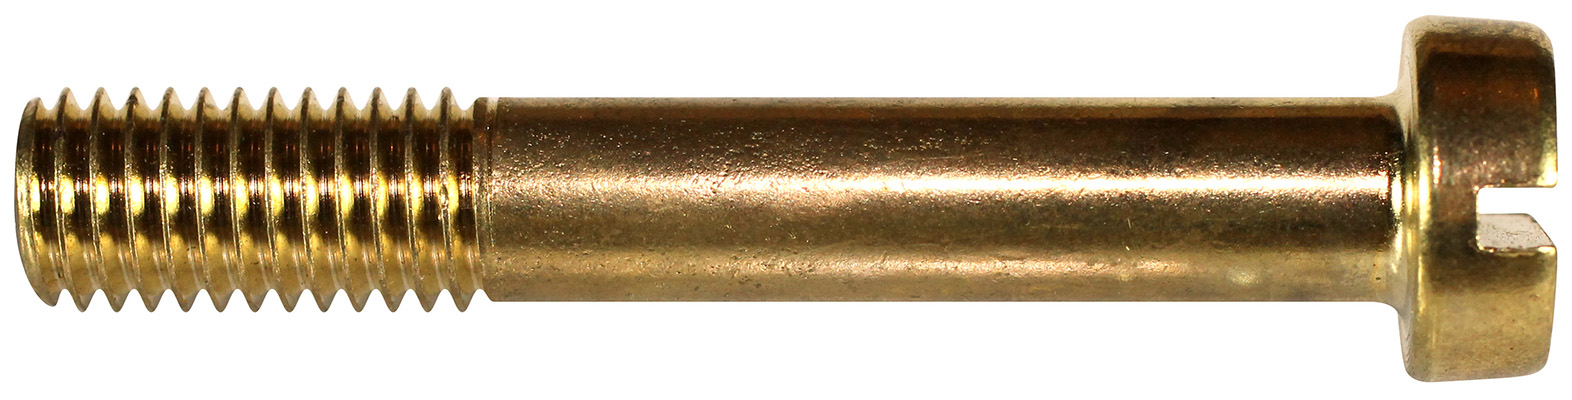 Image of a Steel Imperial Headed Fastener